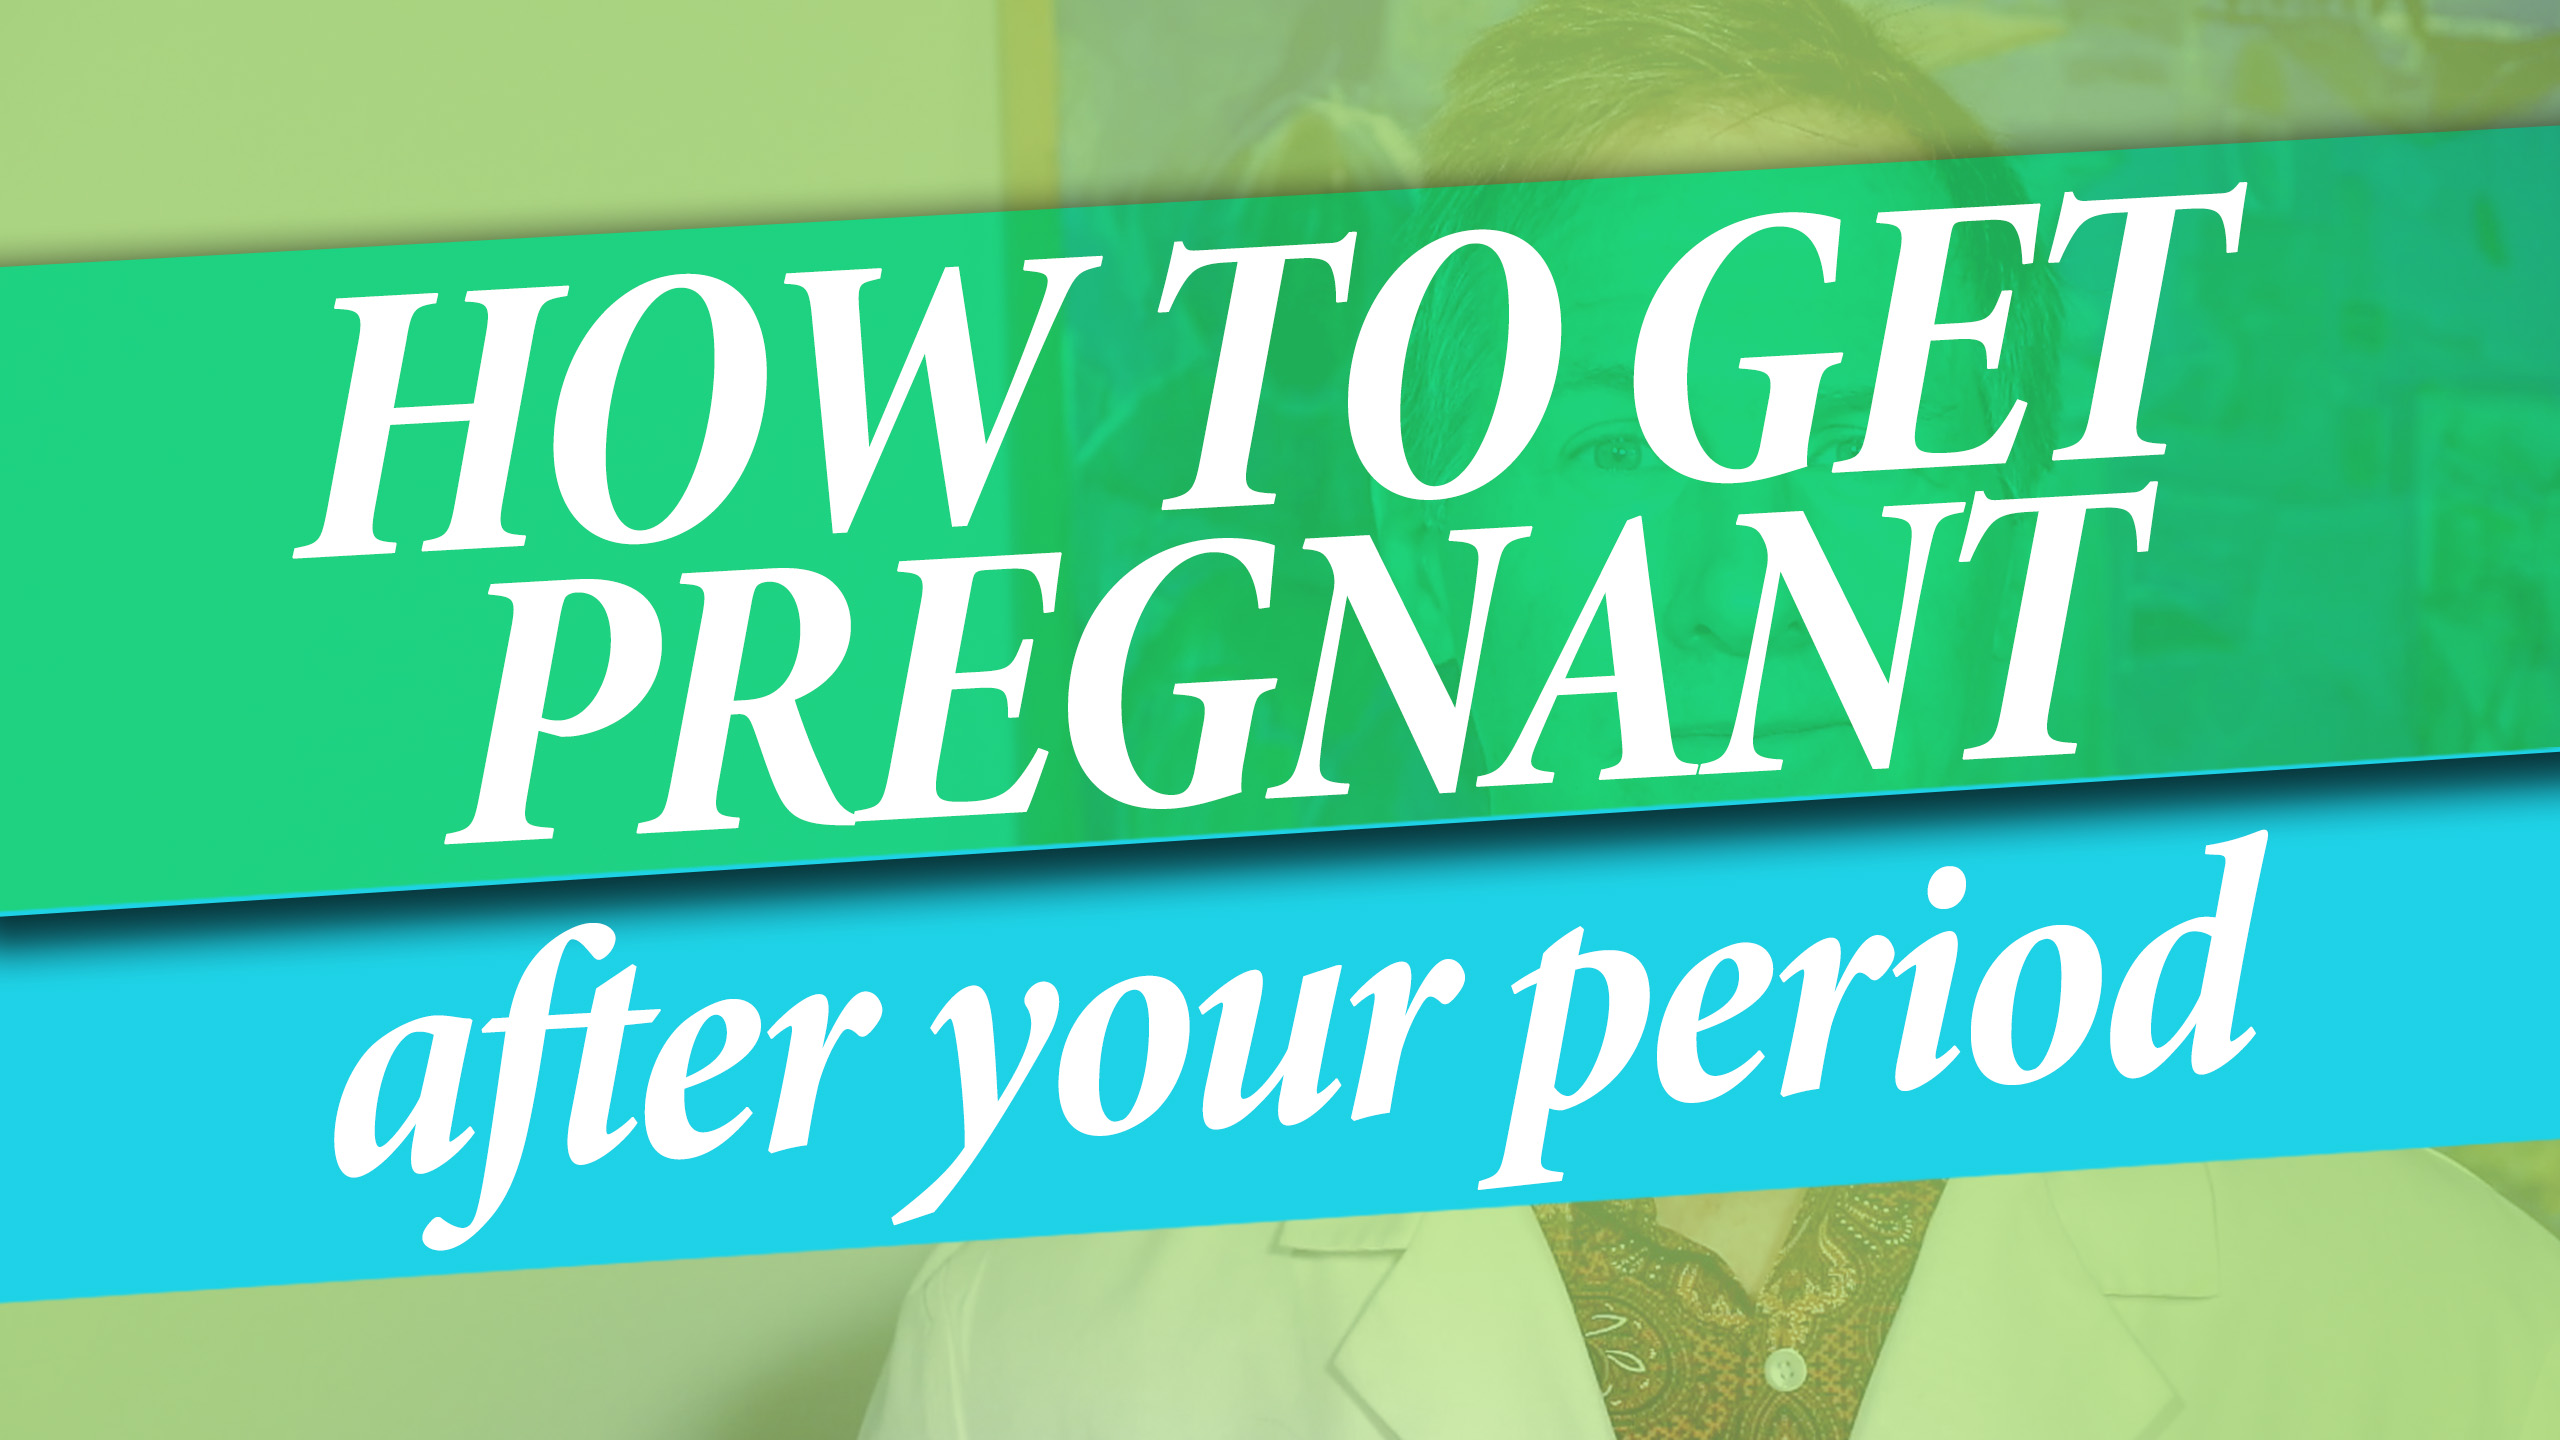 How to Get Pregnant After Period